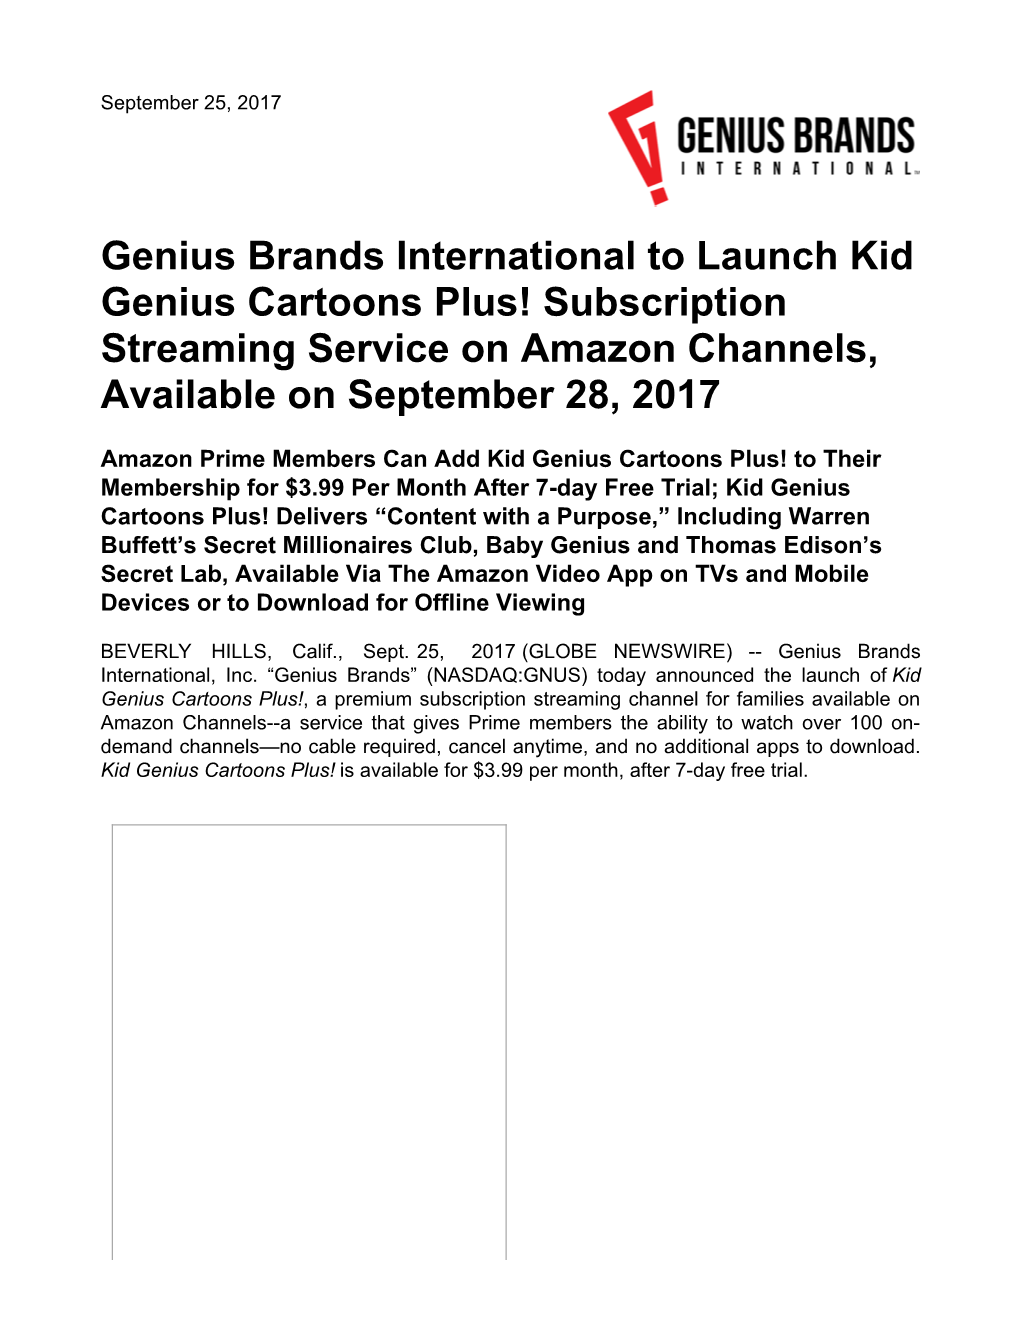 Genius Brands International to Launch Kid Genius Cartoons Plus! Subscription Streaming Service on Amazon Channels, Available on September 28, 2017